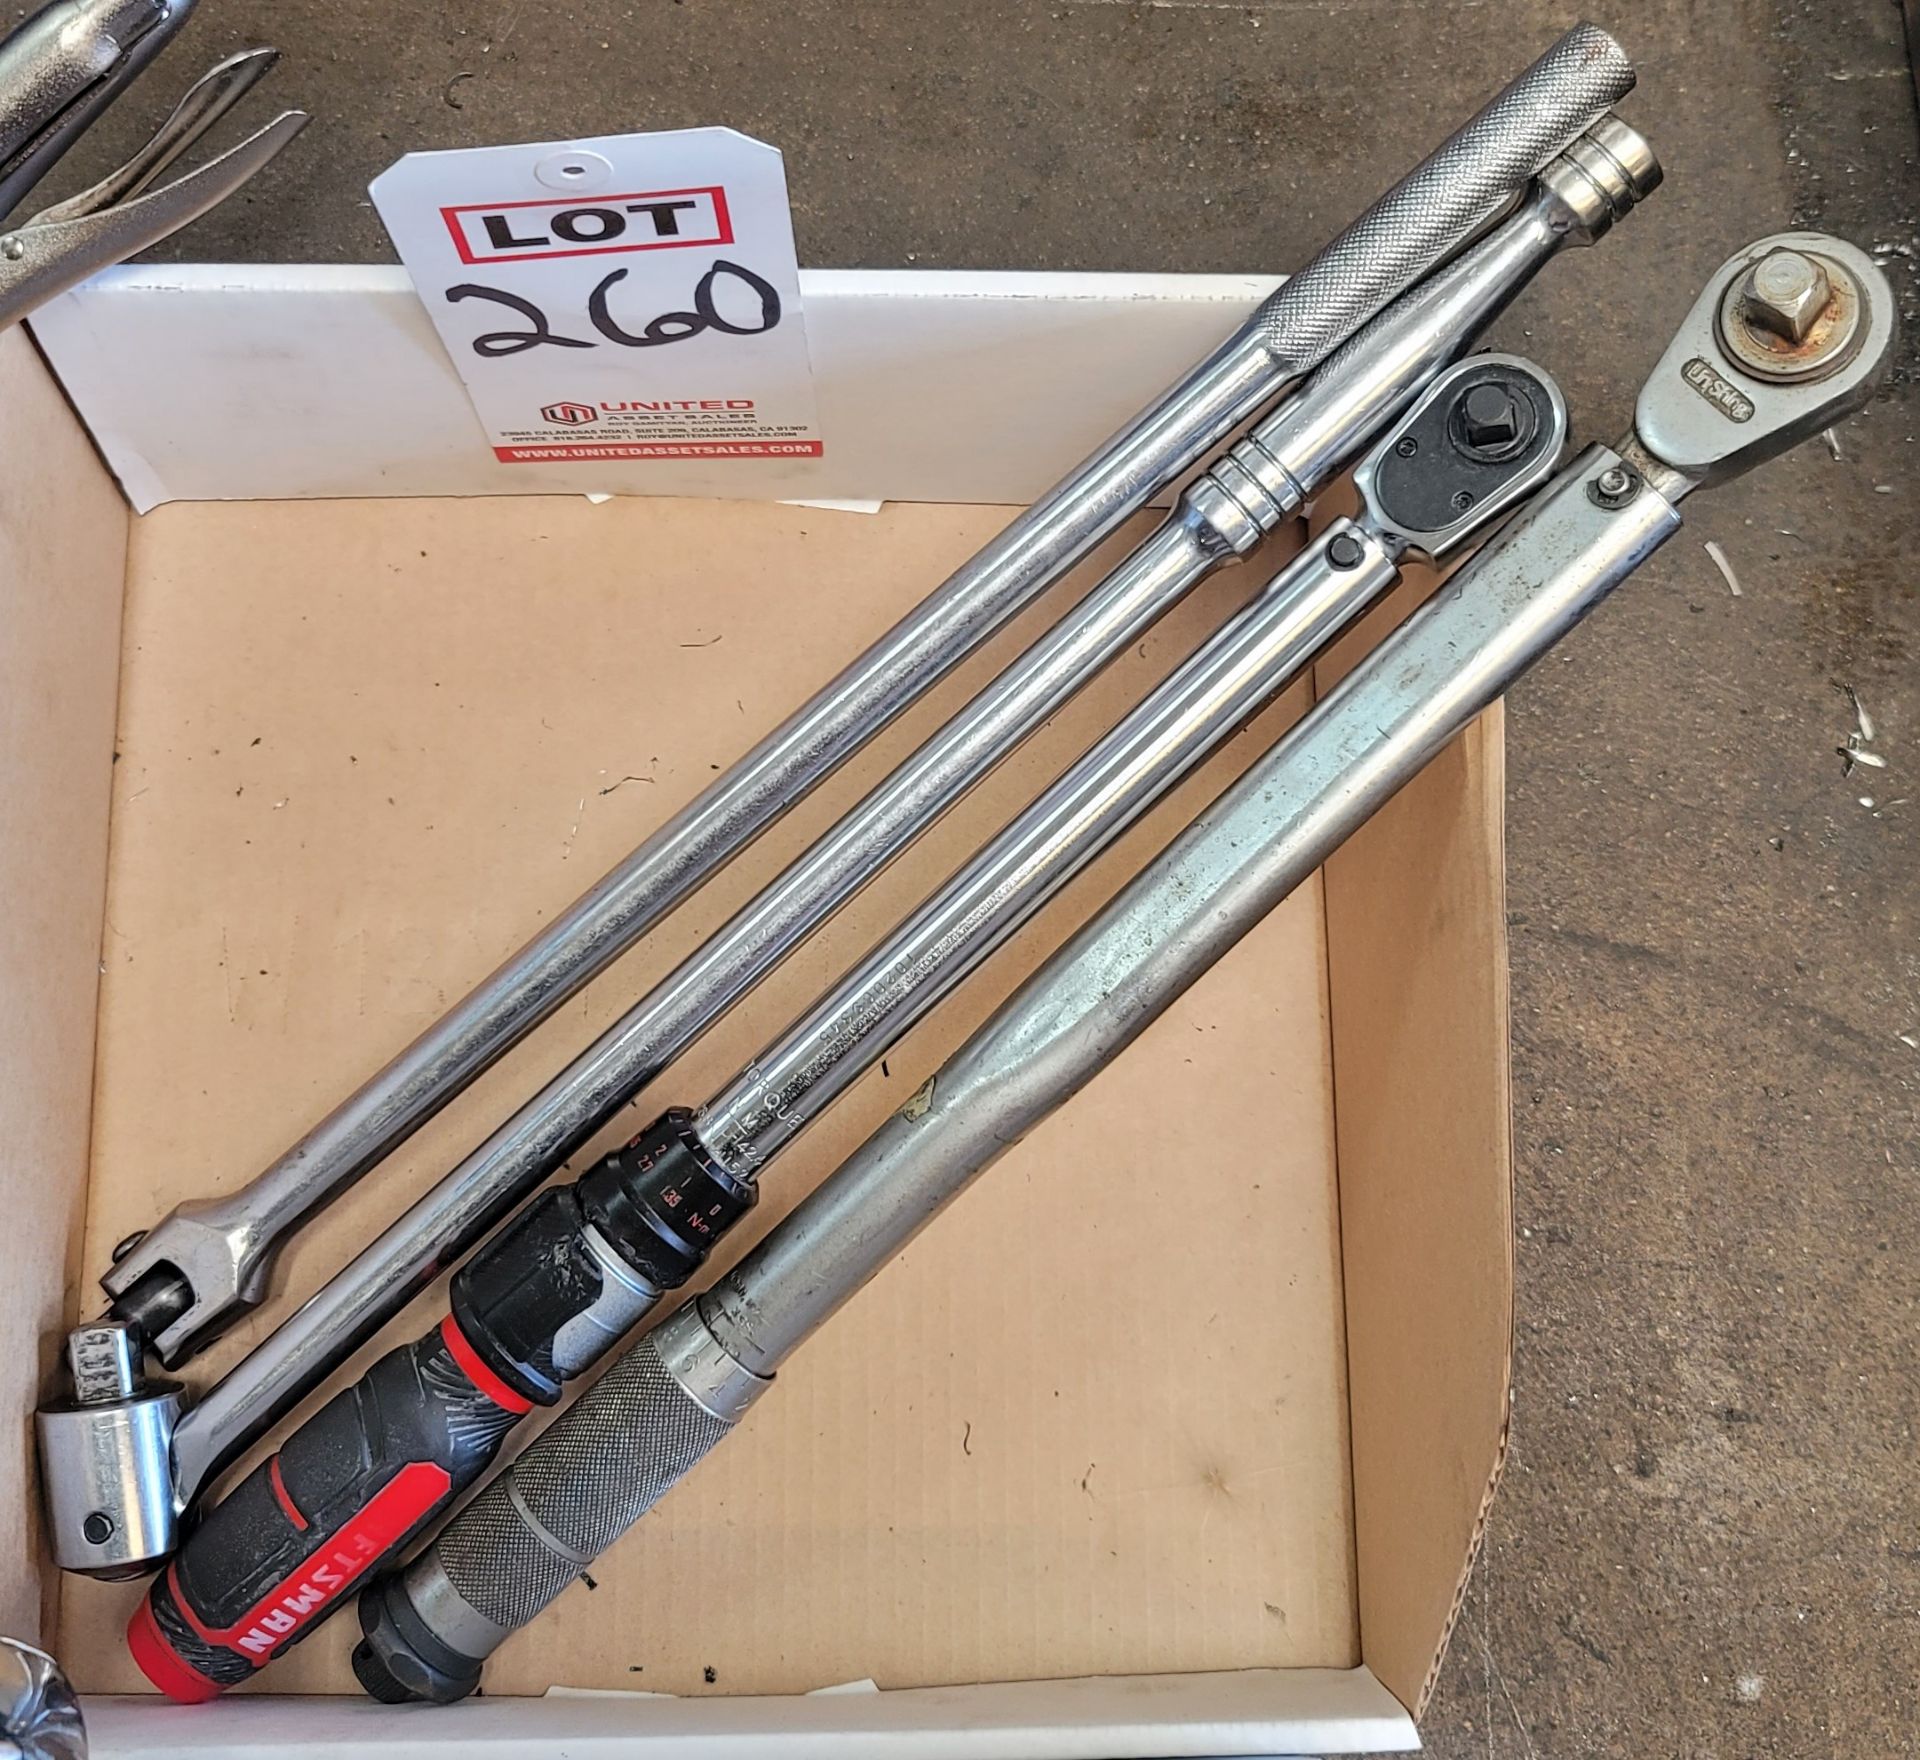 LOT - BREAKER BARS, RATCHET AND TORQUE WRENCH